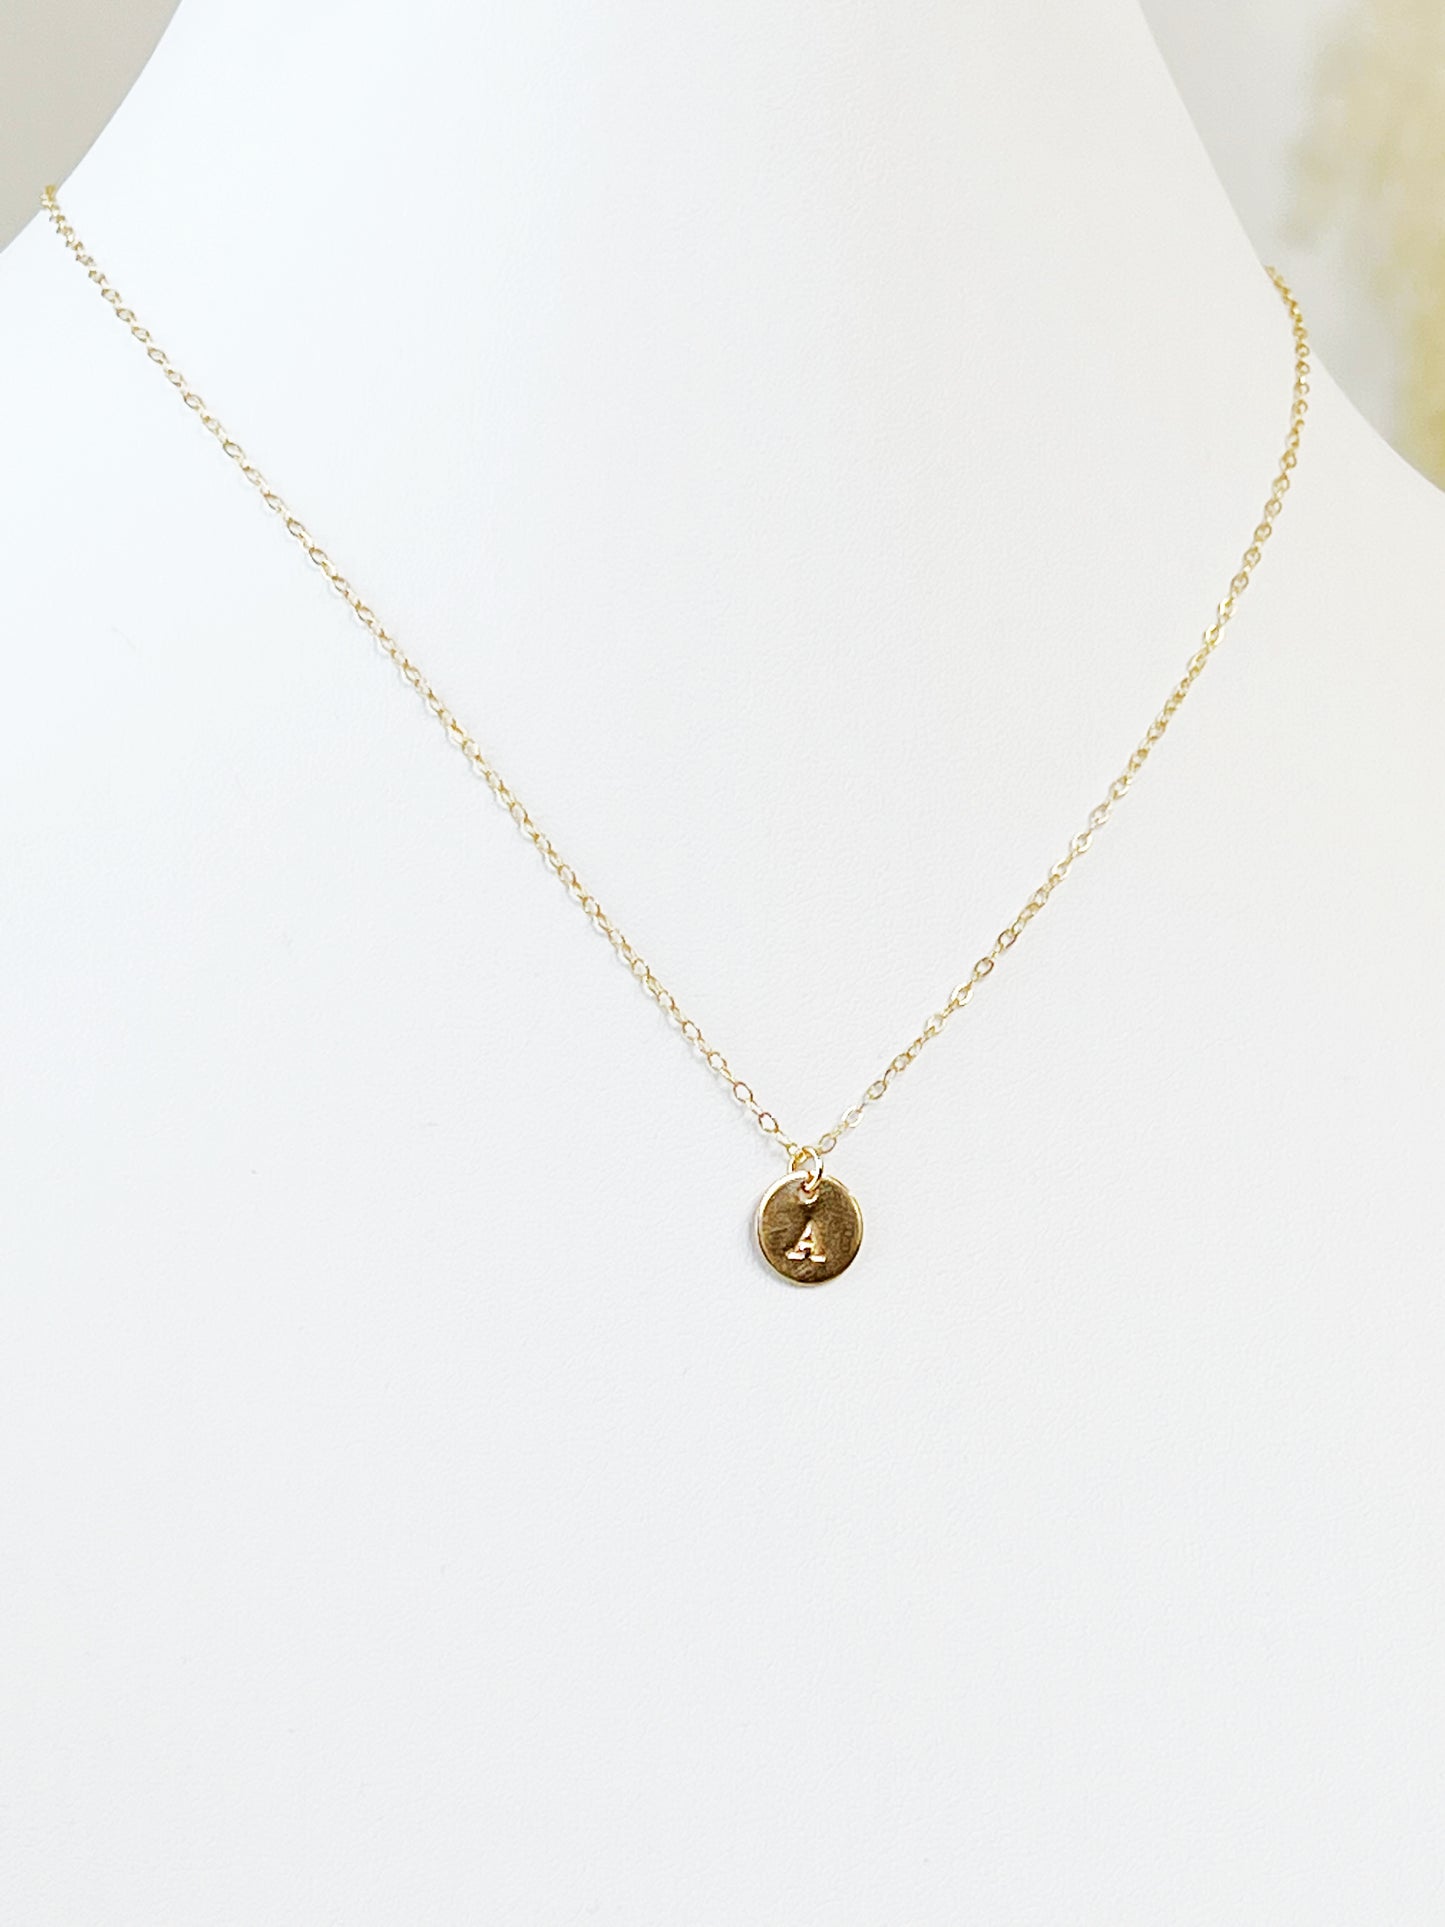 Small Hand stamped Initial Necklace